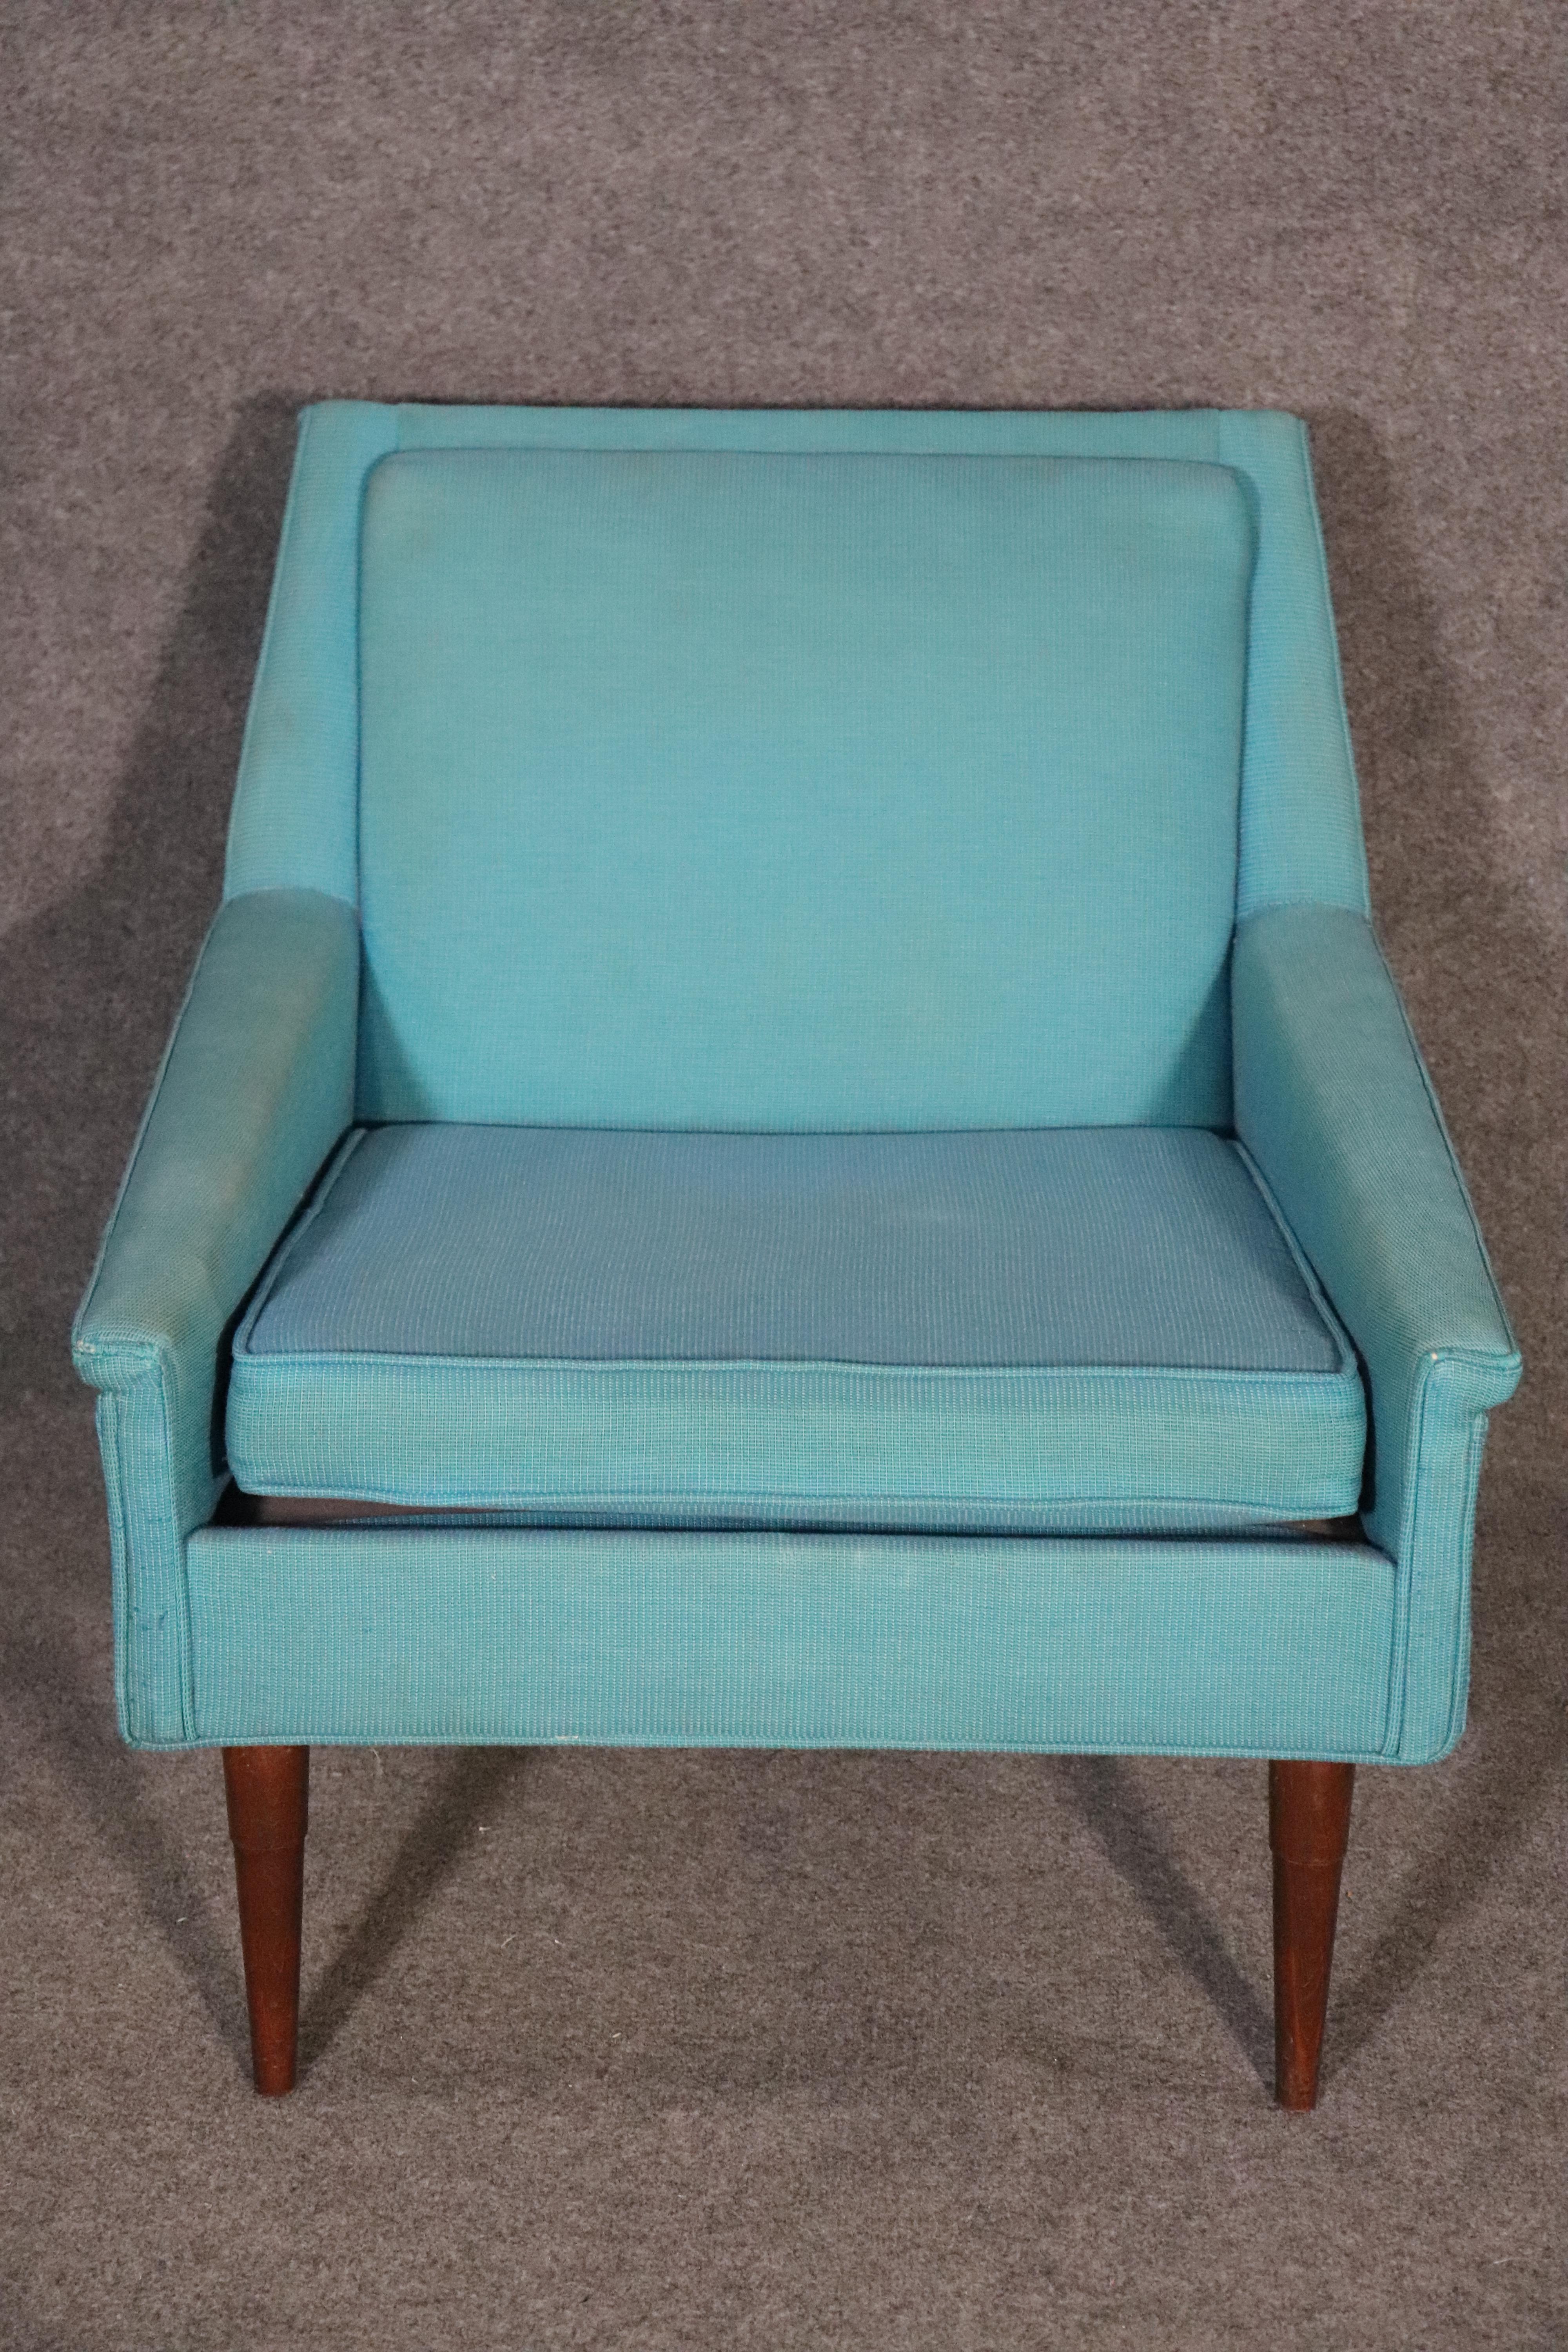 Mid-century modern lounge chair by Selig of Monroe. Great modern lines with low back and slightly turned arm rests.
Please confirm location NY or NJ.